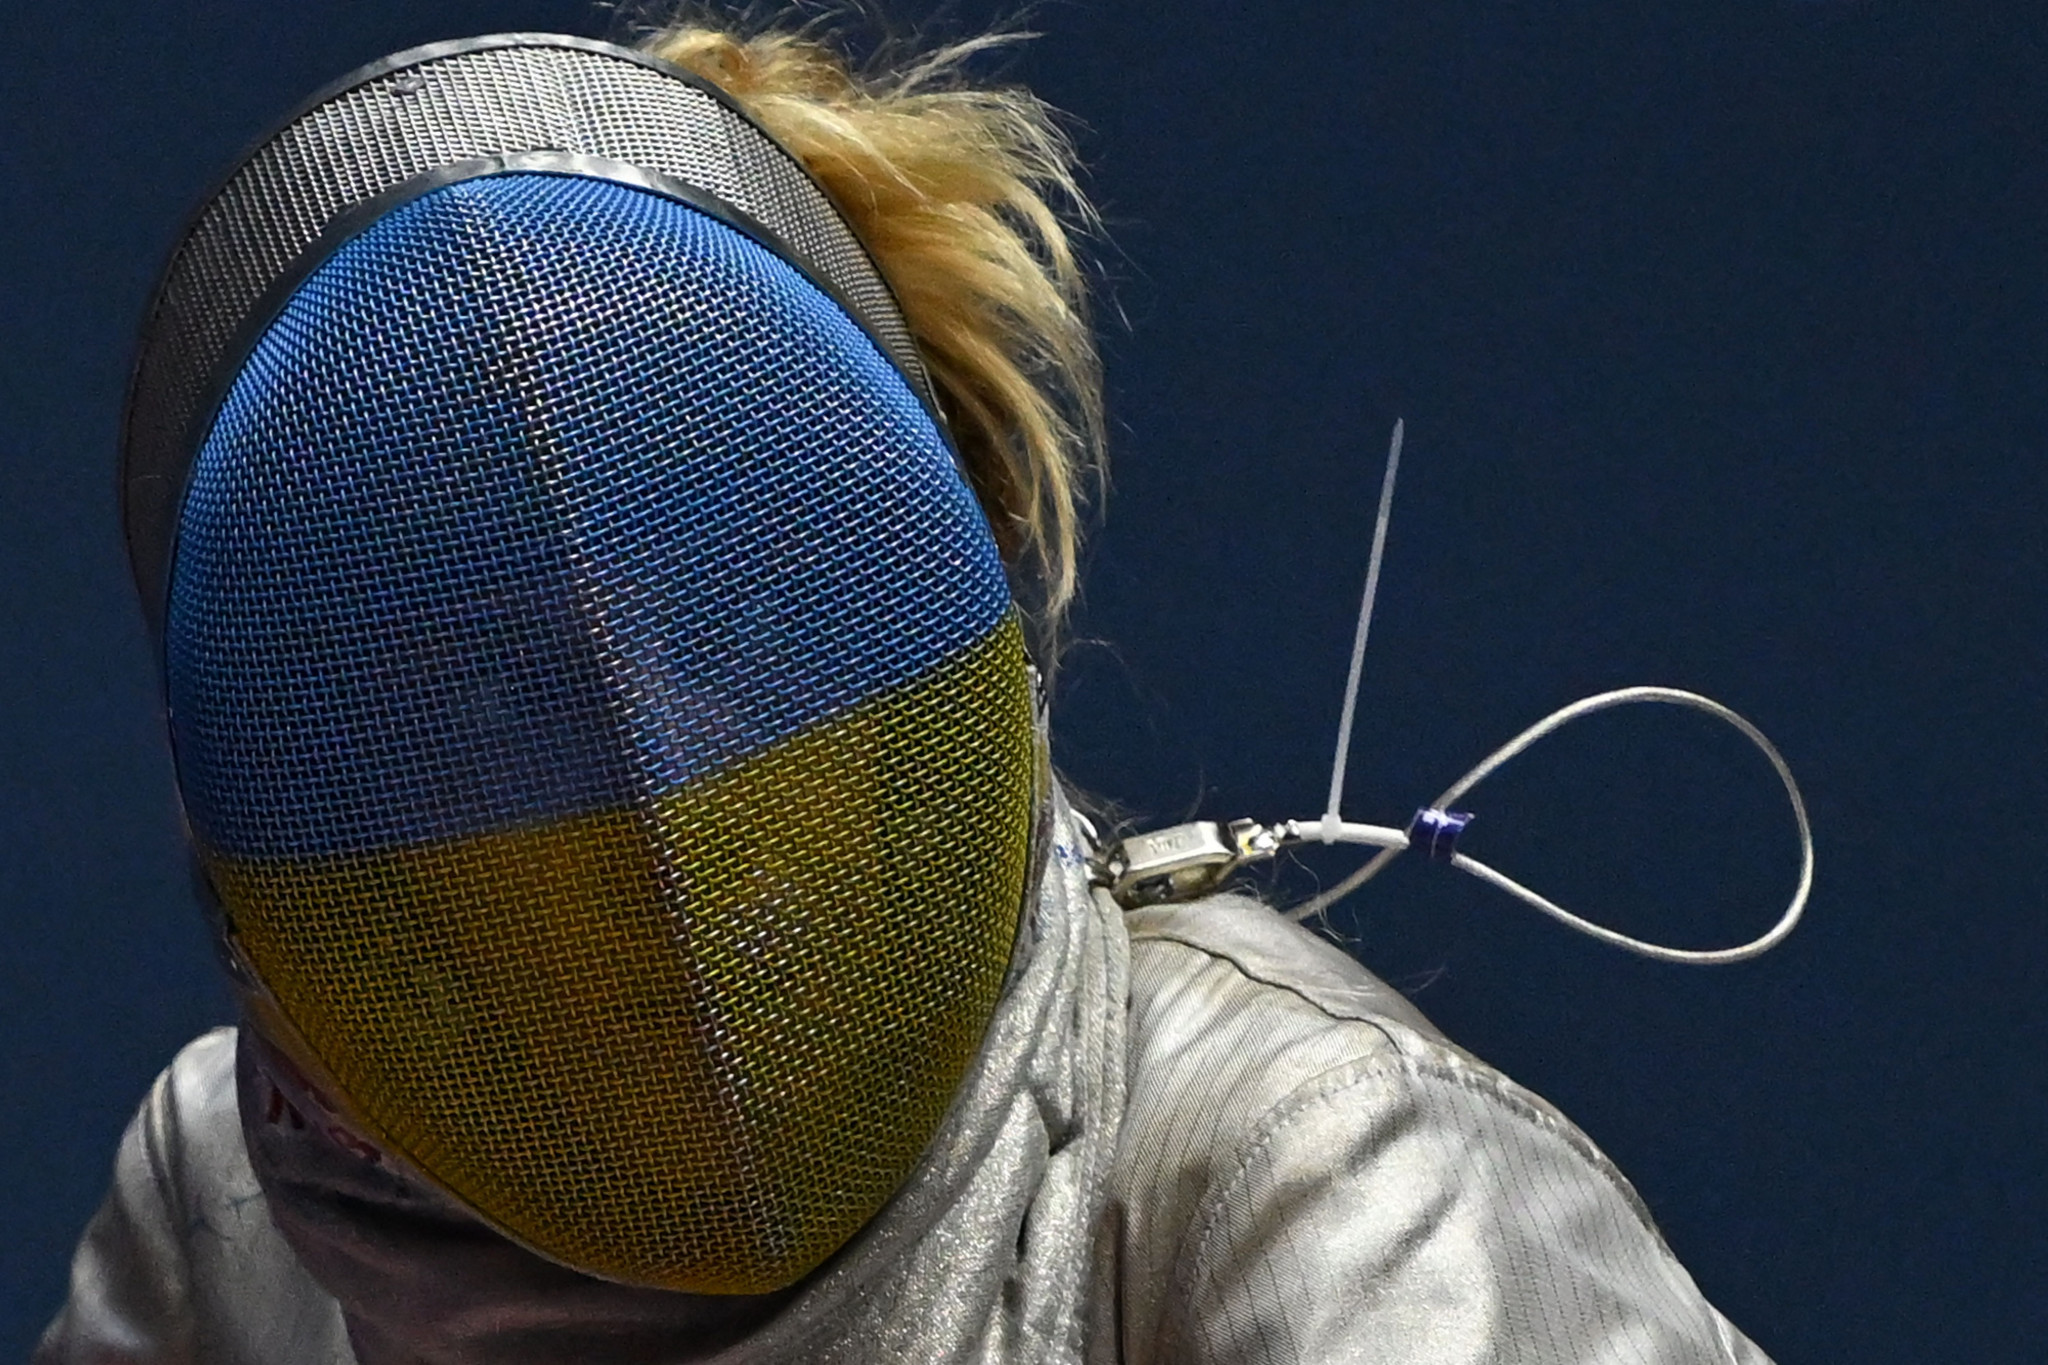 Ukrainian Fencing Federation calls for action over FIE's "violation of IOC Code of Ethics"